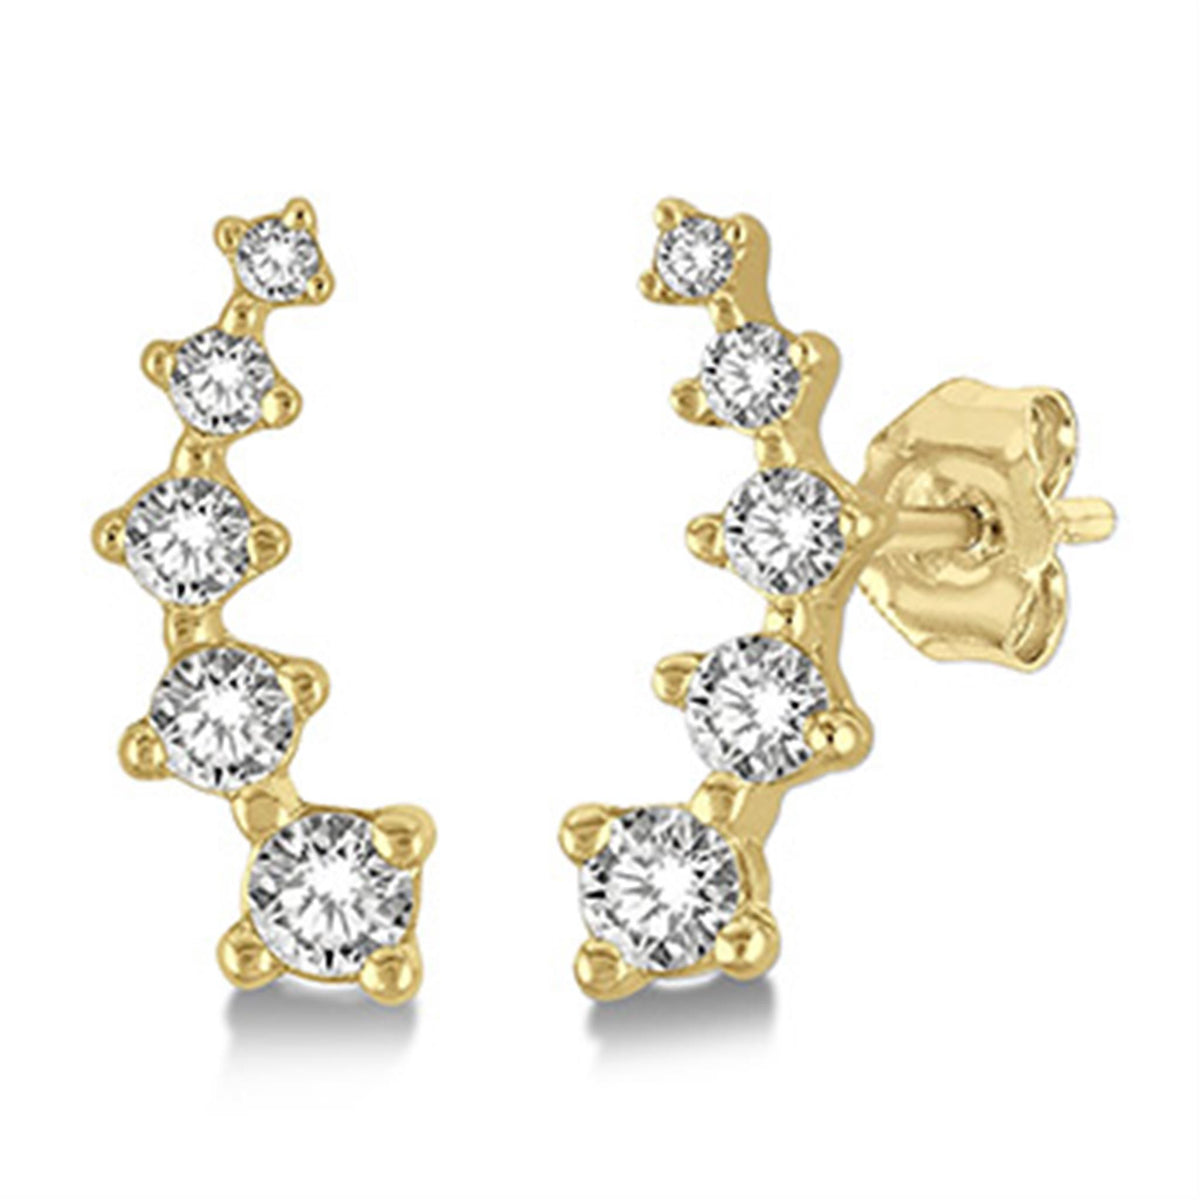 10Kt Yellow Gold Petite Climber Stud Earrings with .10cttw Natural Diamonds